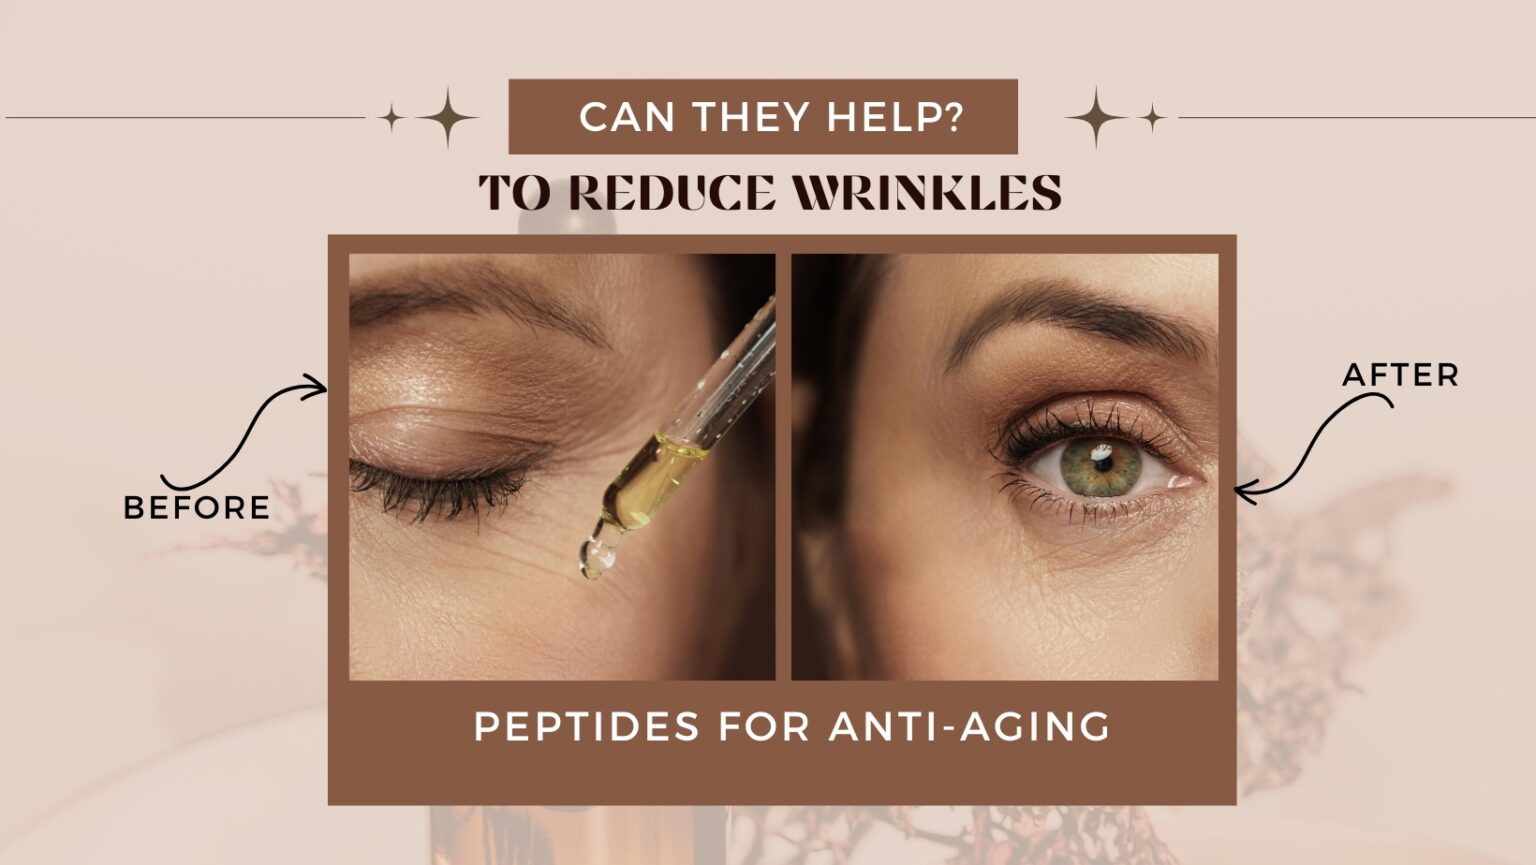 Peptides for Anti-Aging: Can they help to Reduce Wrinkles?